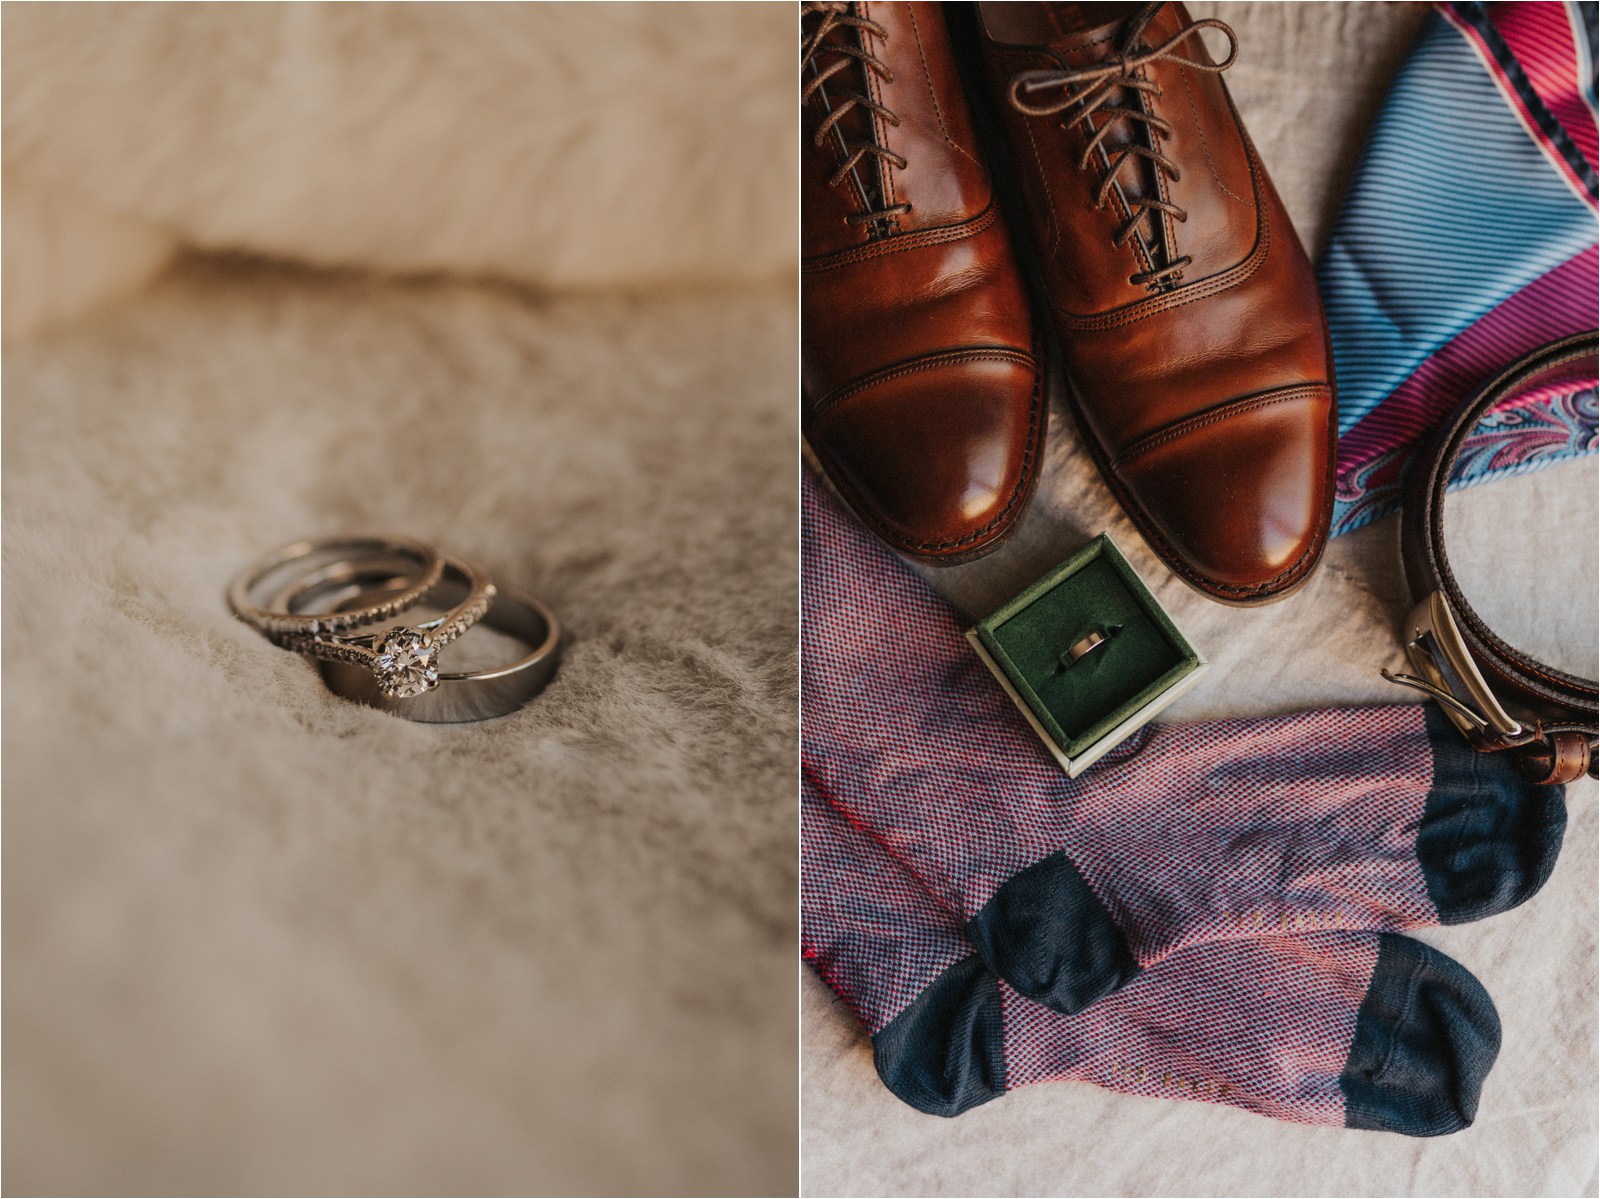 A close-up image of the elopement couple's rings, as well as a flat lay of the groom's jewelry and accessories.